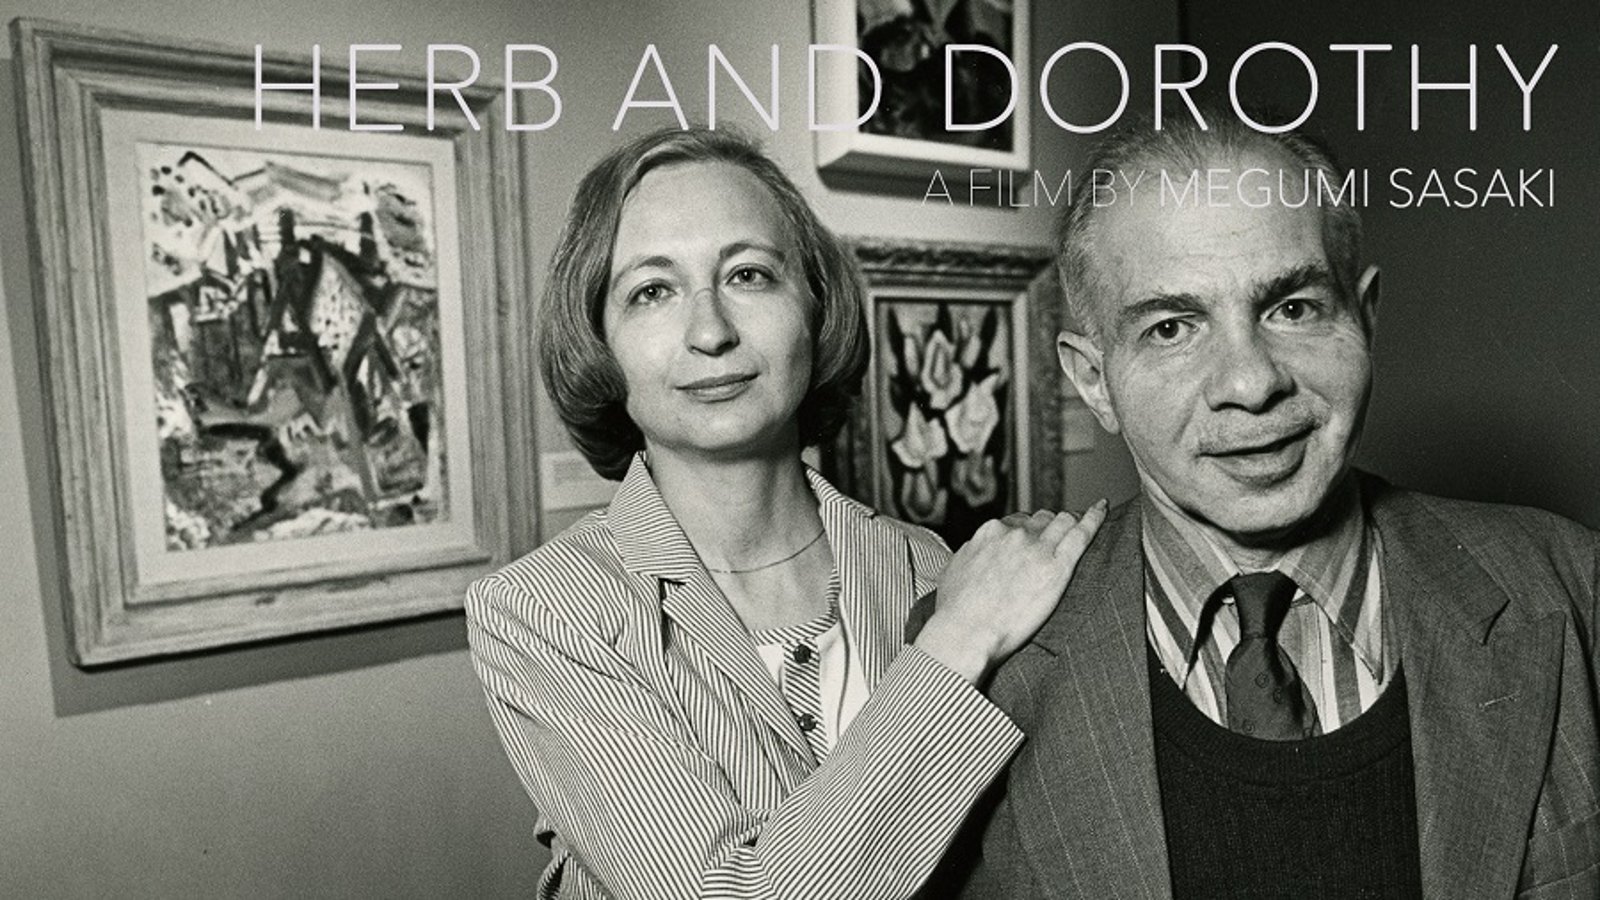 Herb and Dorothy - An Extraordinary Art Collection Created from Humble Means